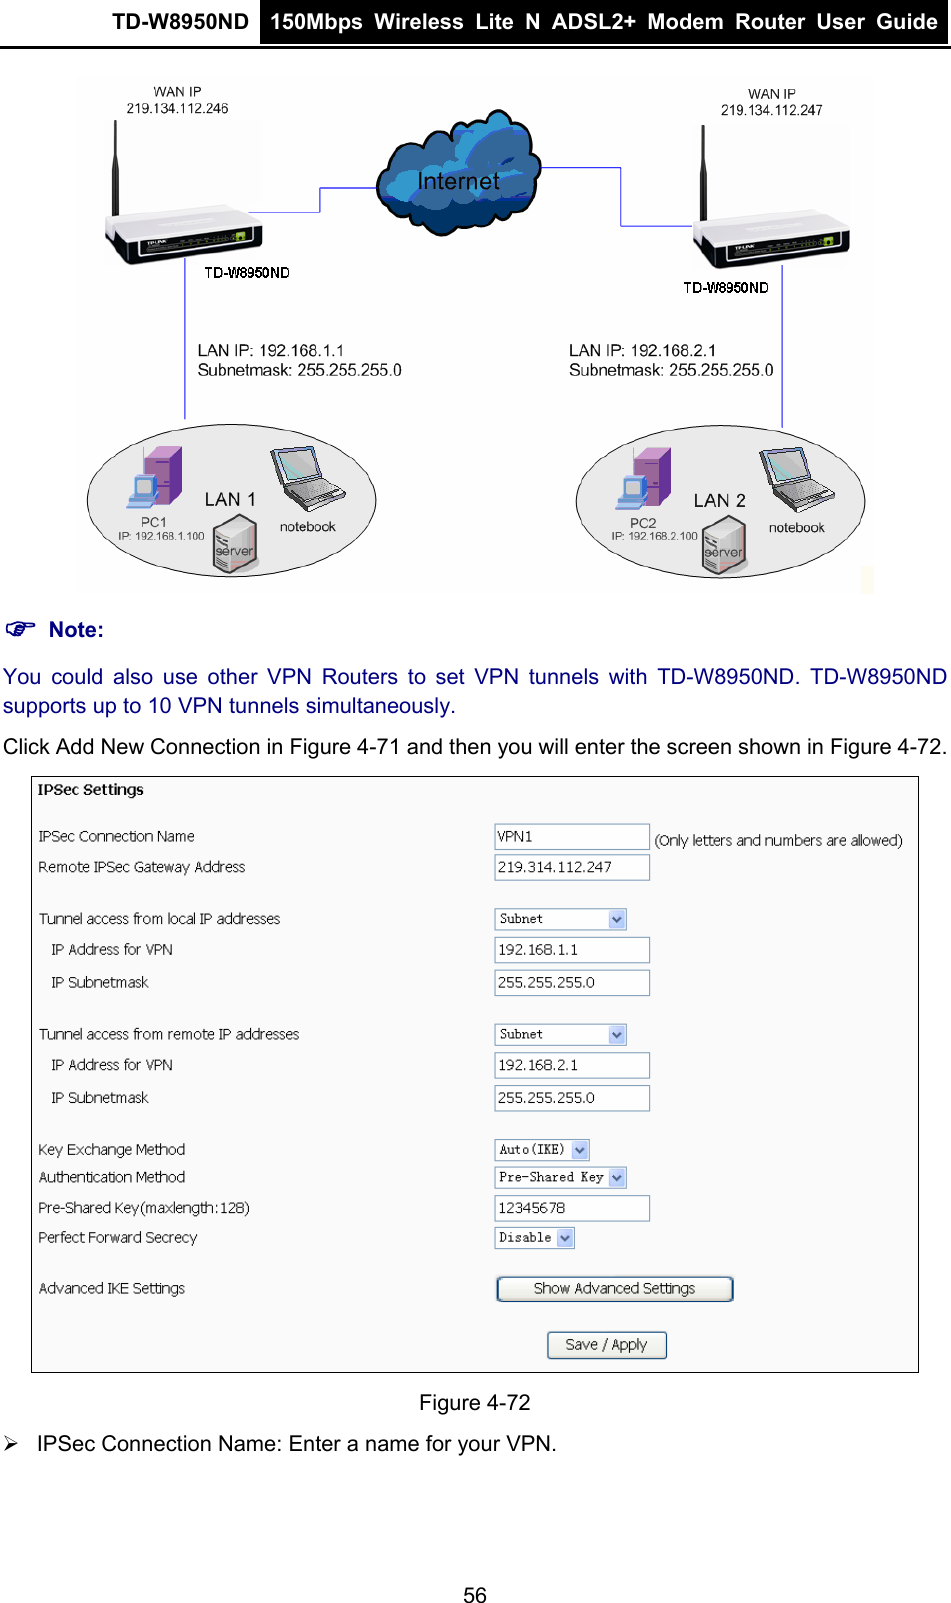 TD-W8950ND  150Mbps Wireless Lite N ADSL2+ Modem Router User Guide   ) Note: You could also use other VPN Routers to set VPN tunnels with TD-W8950ND. TD-W8950ND supports up to 10 VPN tunnels simultaneously. Click Add New Connection in Figure 4-71 and then you will enter the screen shown in Figure 4-72.  Figure 4-72 ¾  IPSec Connection Name: Enter a name for your VPN. 56 